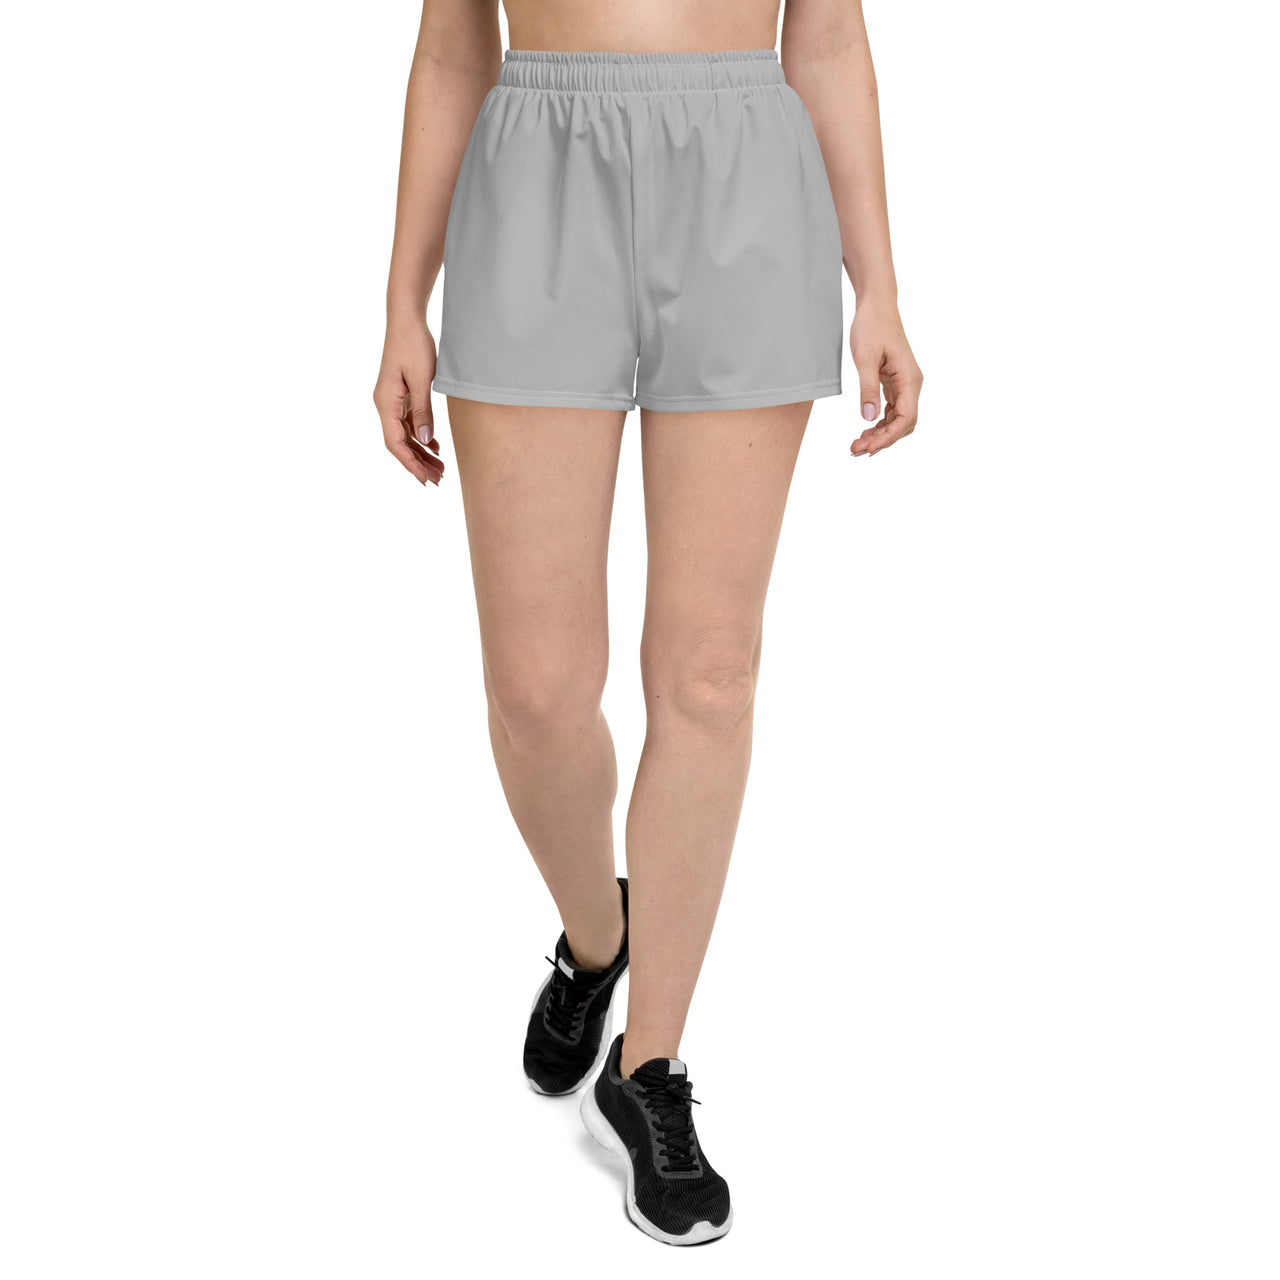 Women’s Recycled Solid Athletic Shorts - Smoke SHAVA CO